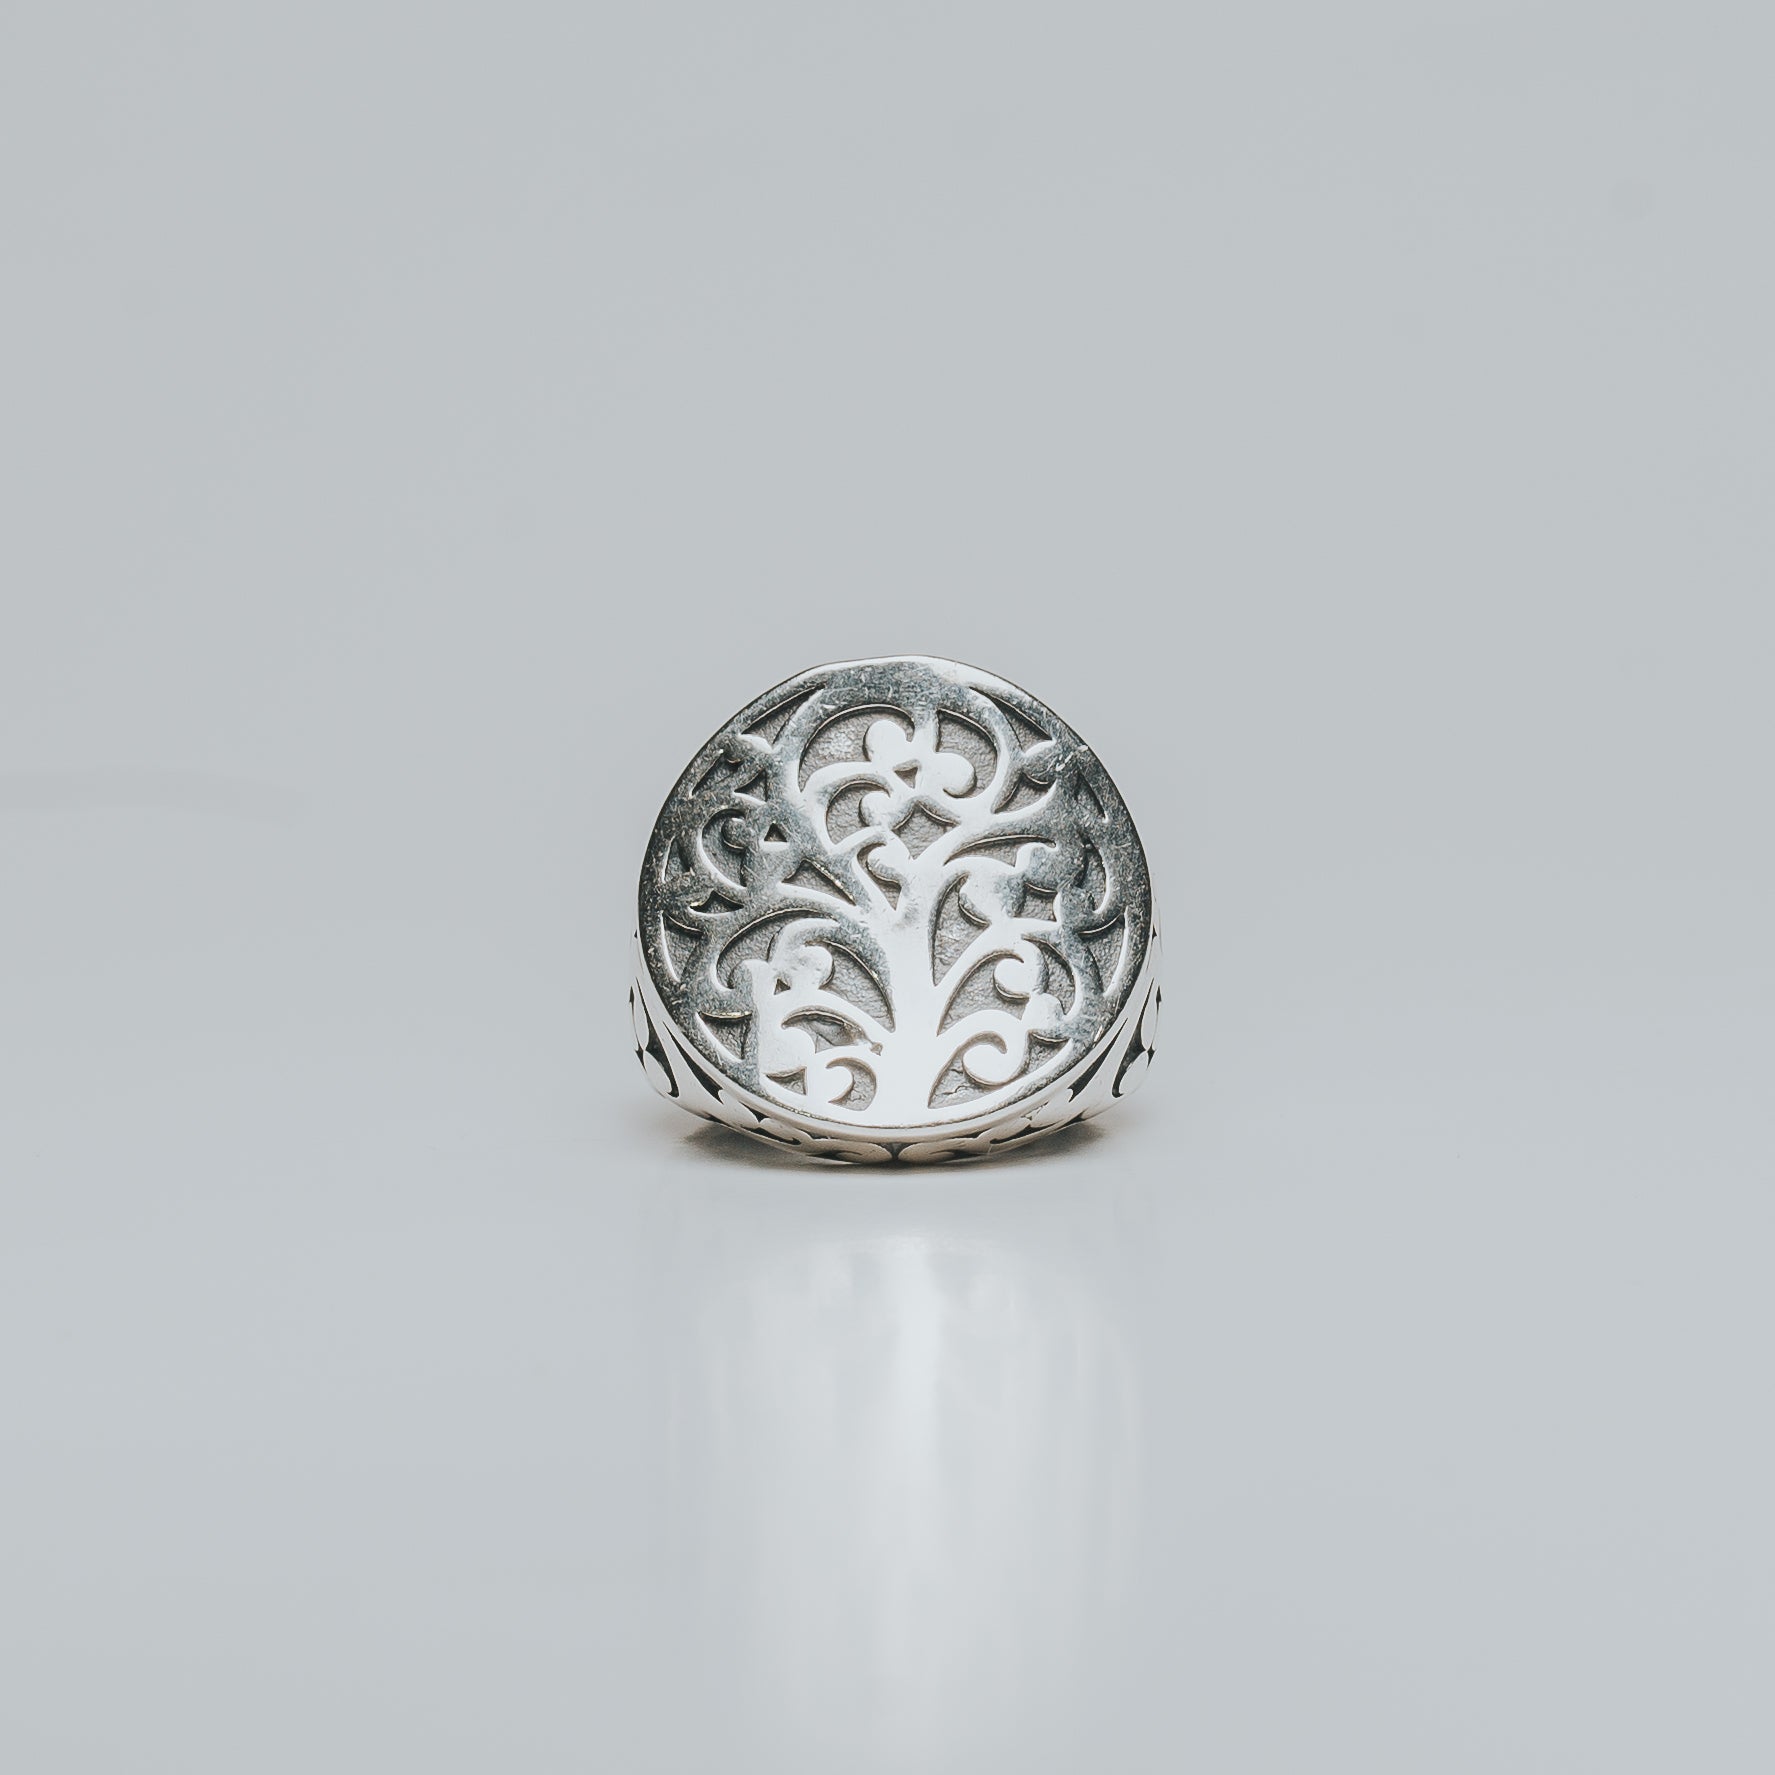 Special Sale 30% OFF @ Checkout- Filigree Ring